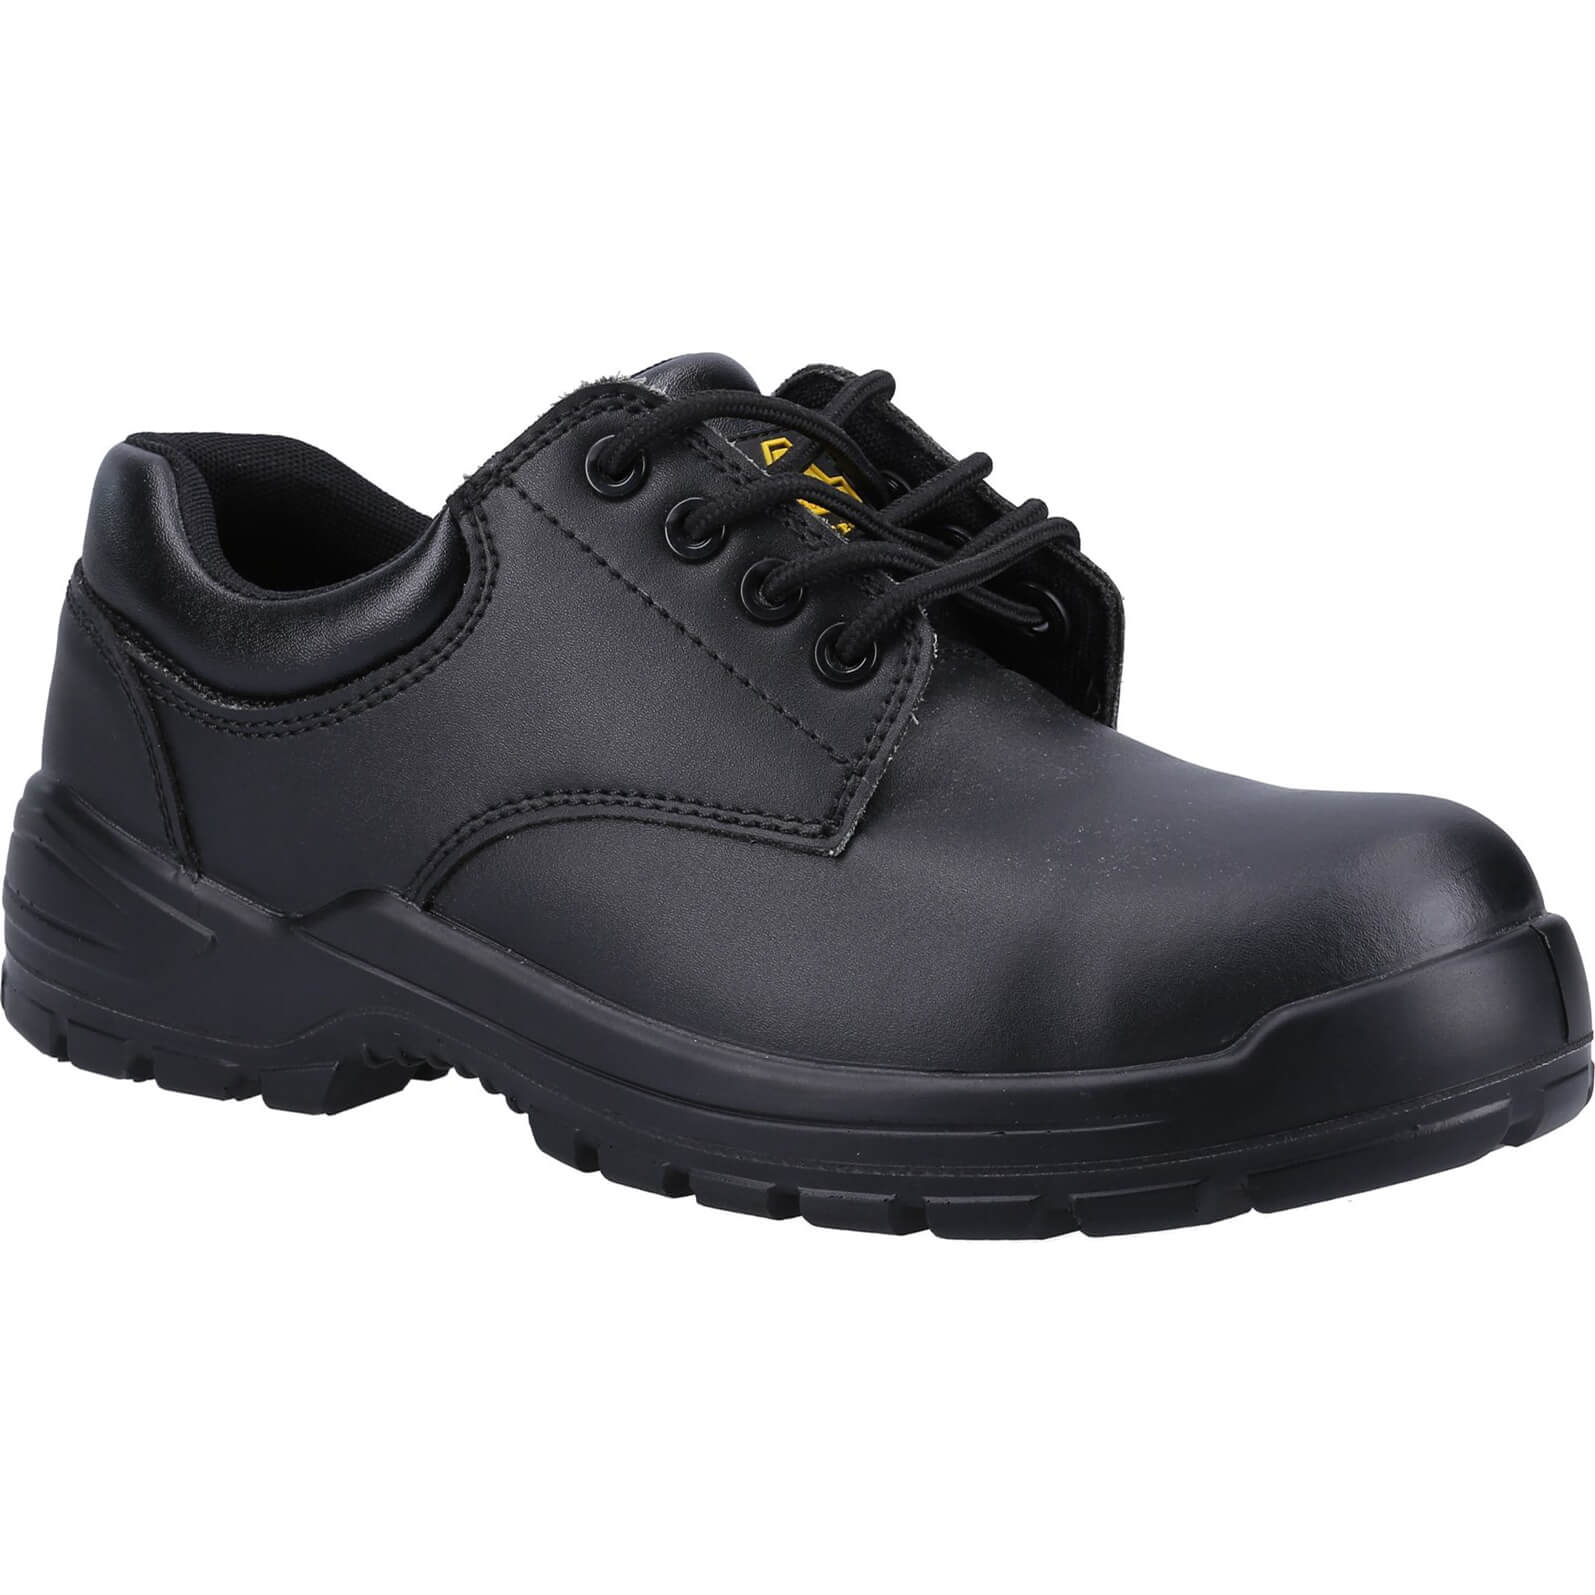 Image of Amblers Safety FS38C Metal Free Composite Gibson Lace Safety Shoe Black Size 4